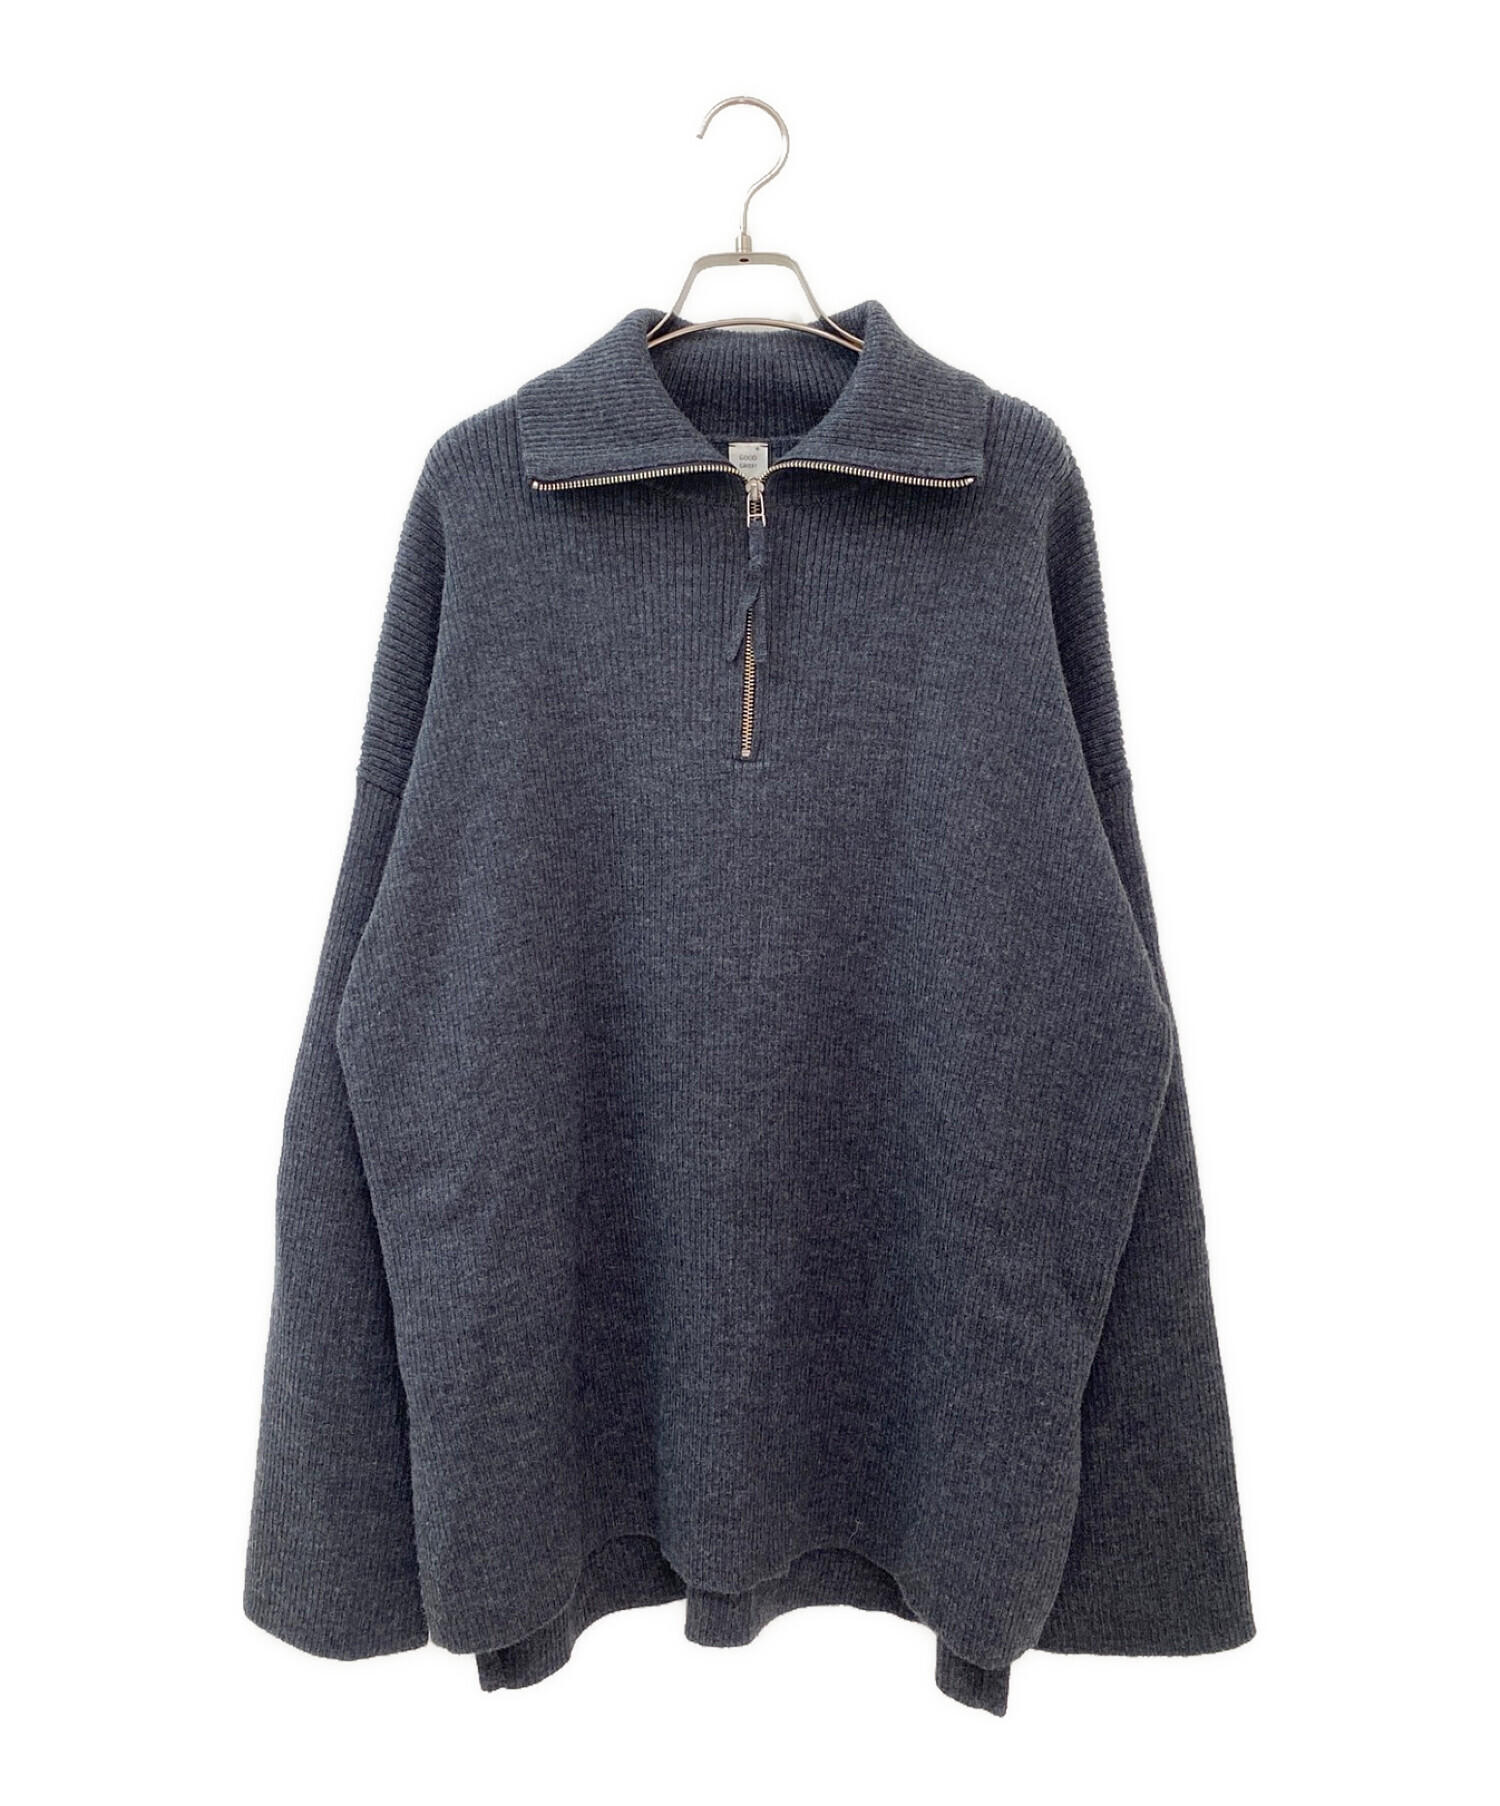 GOOD GRIEF!/グッドグリーフ】Knit Zipped Pullover